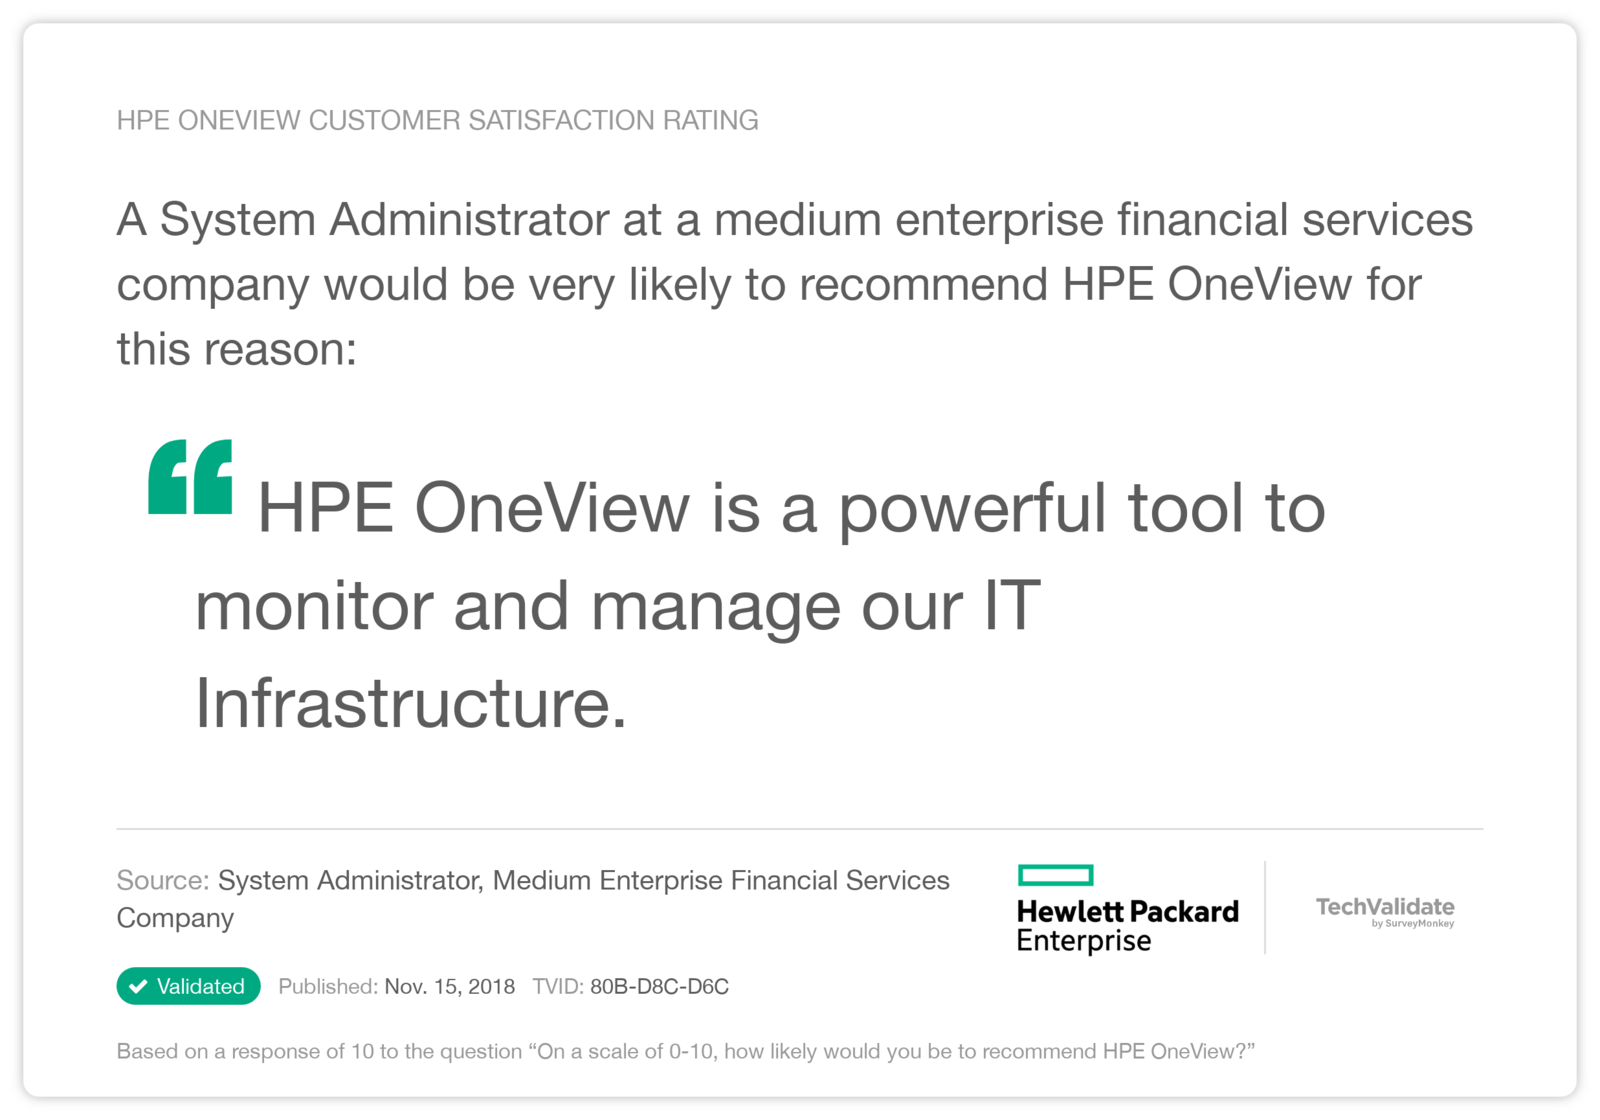 HPE OneView Customer Satisfaction Rating